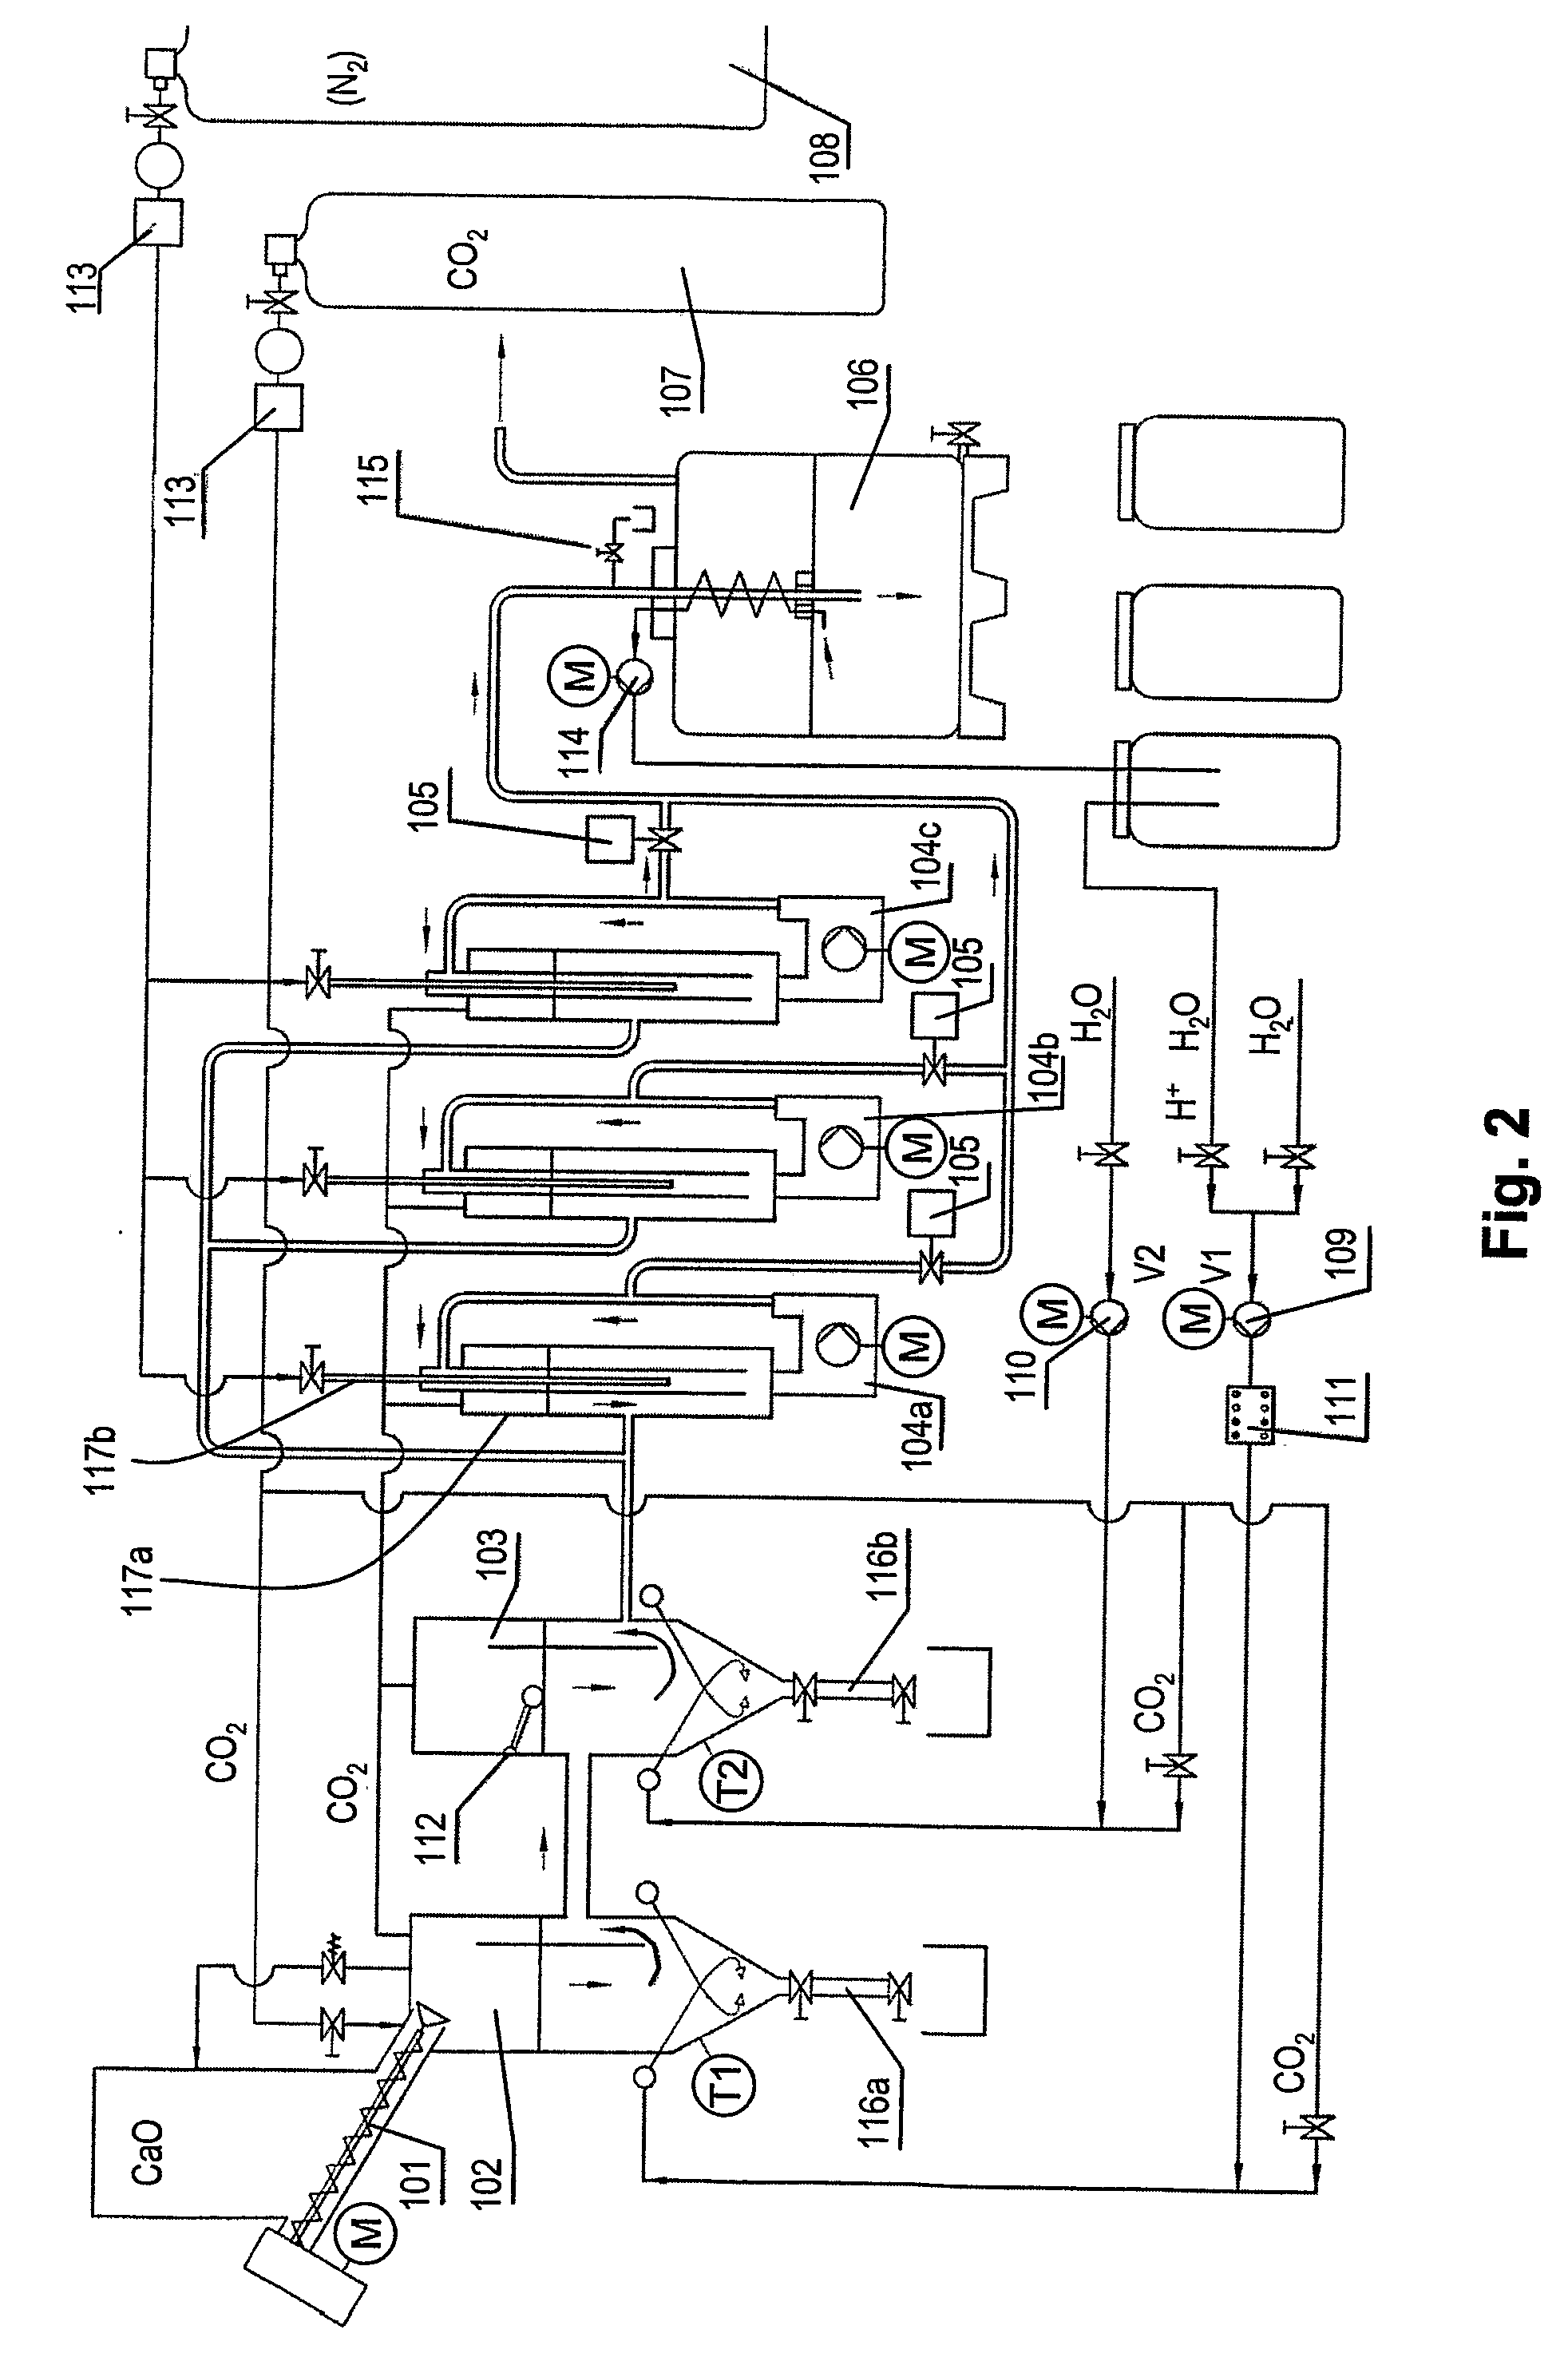 Process and apparatus for producing suspensions of solid matter